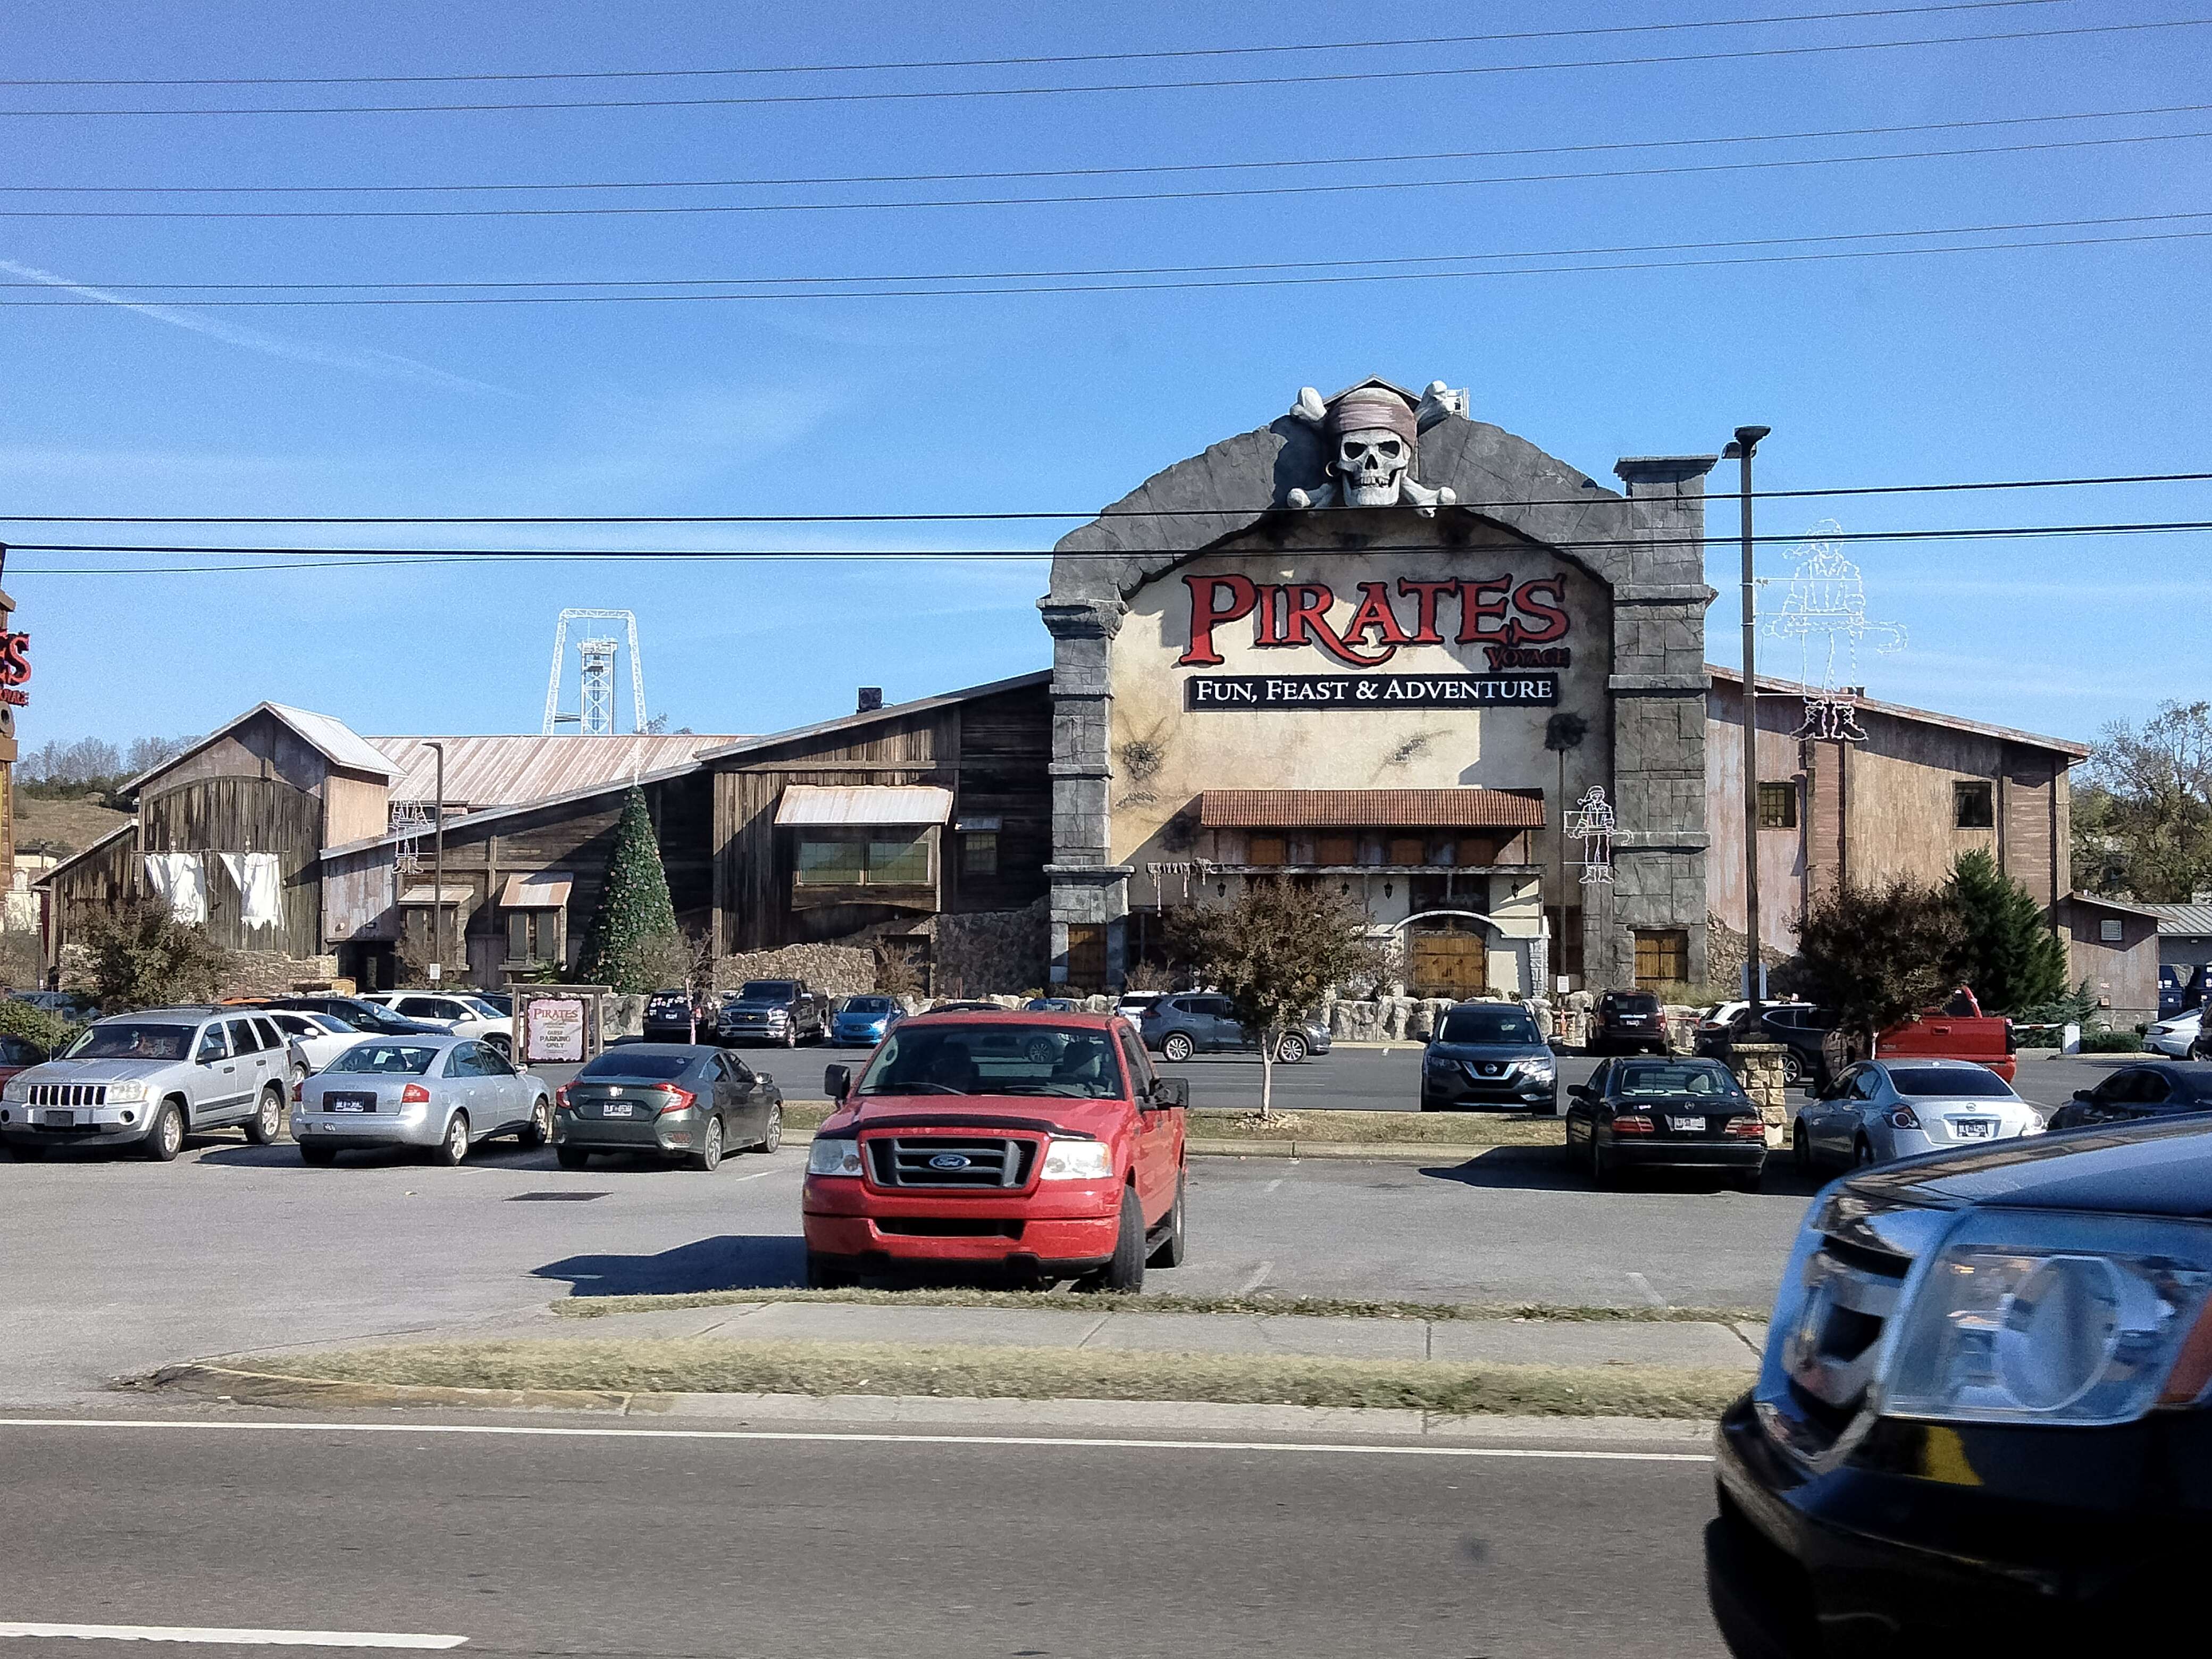 A picture of a roadside restaurant that is pirate-themed. It has a giant skull and crossbones over its entrance and is extravagantly themed to look like a big stone building with wooden rooms.